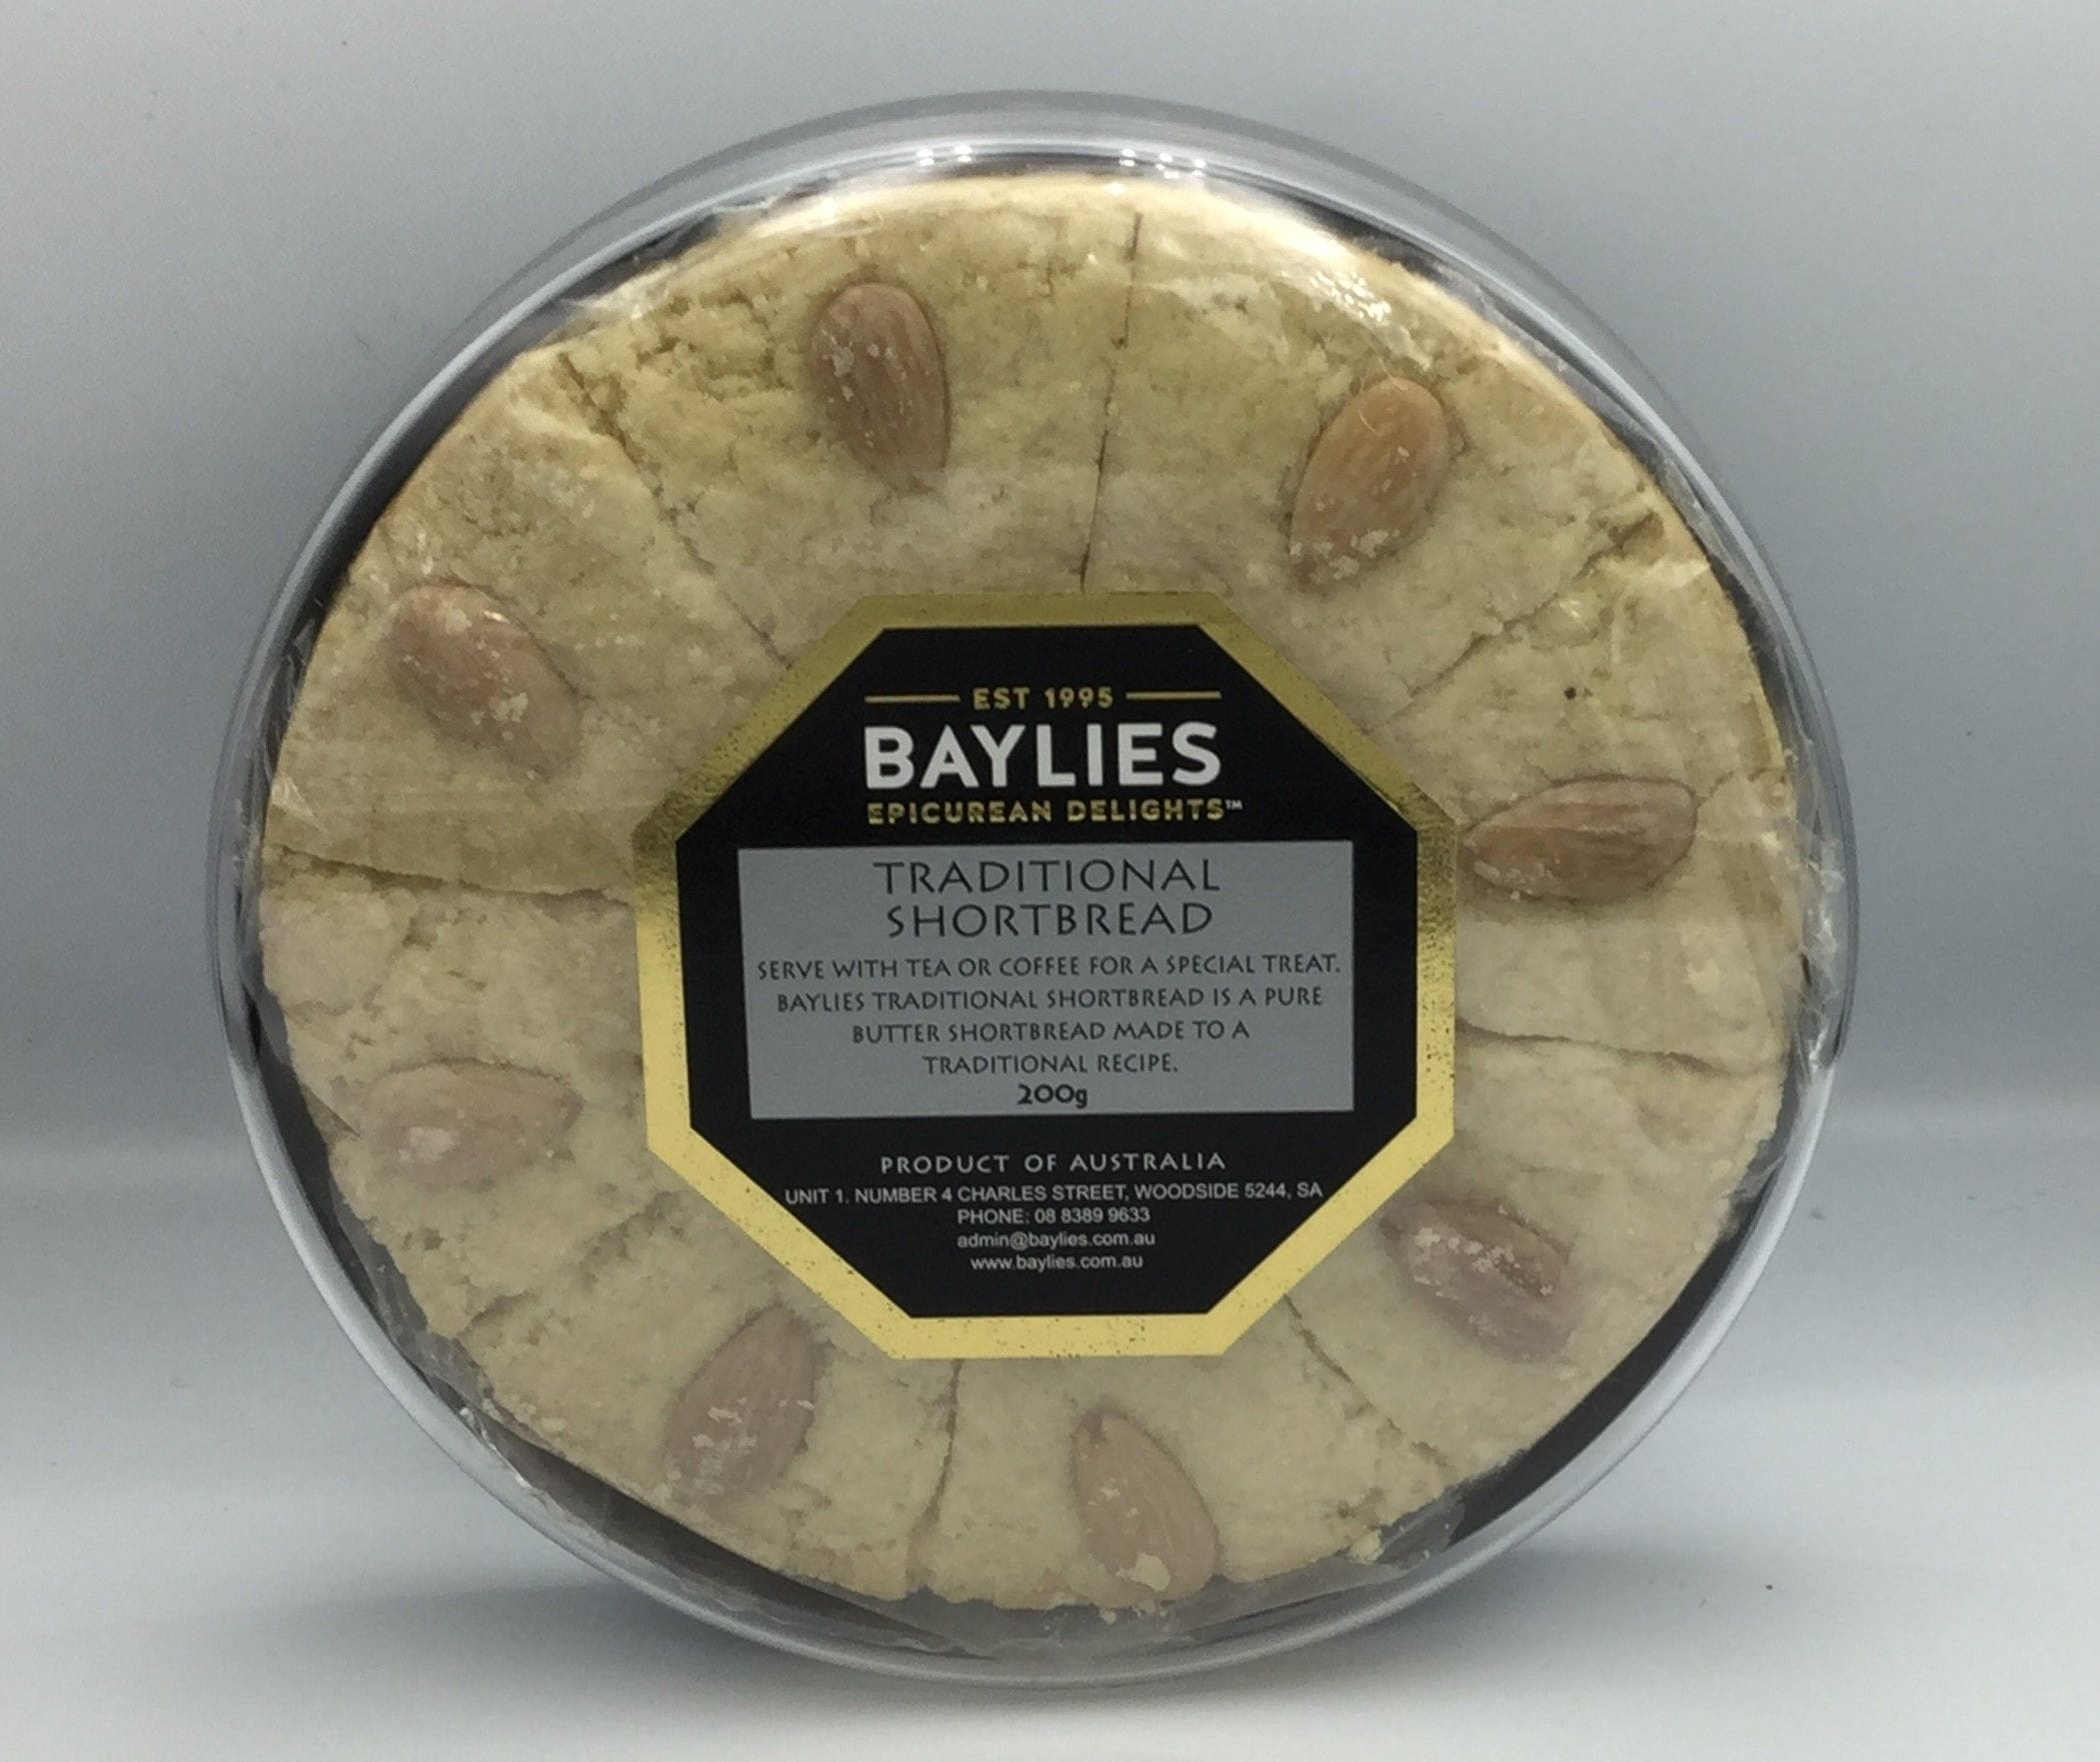 Baylies Traditional Shortbread 200g